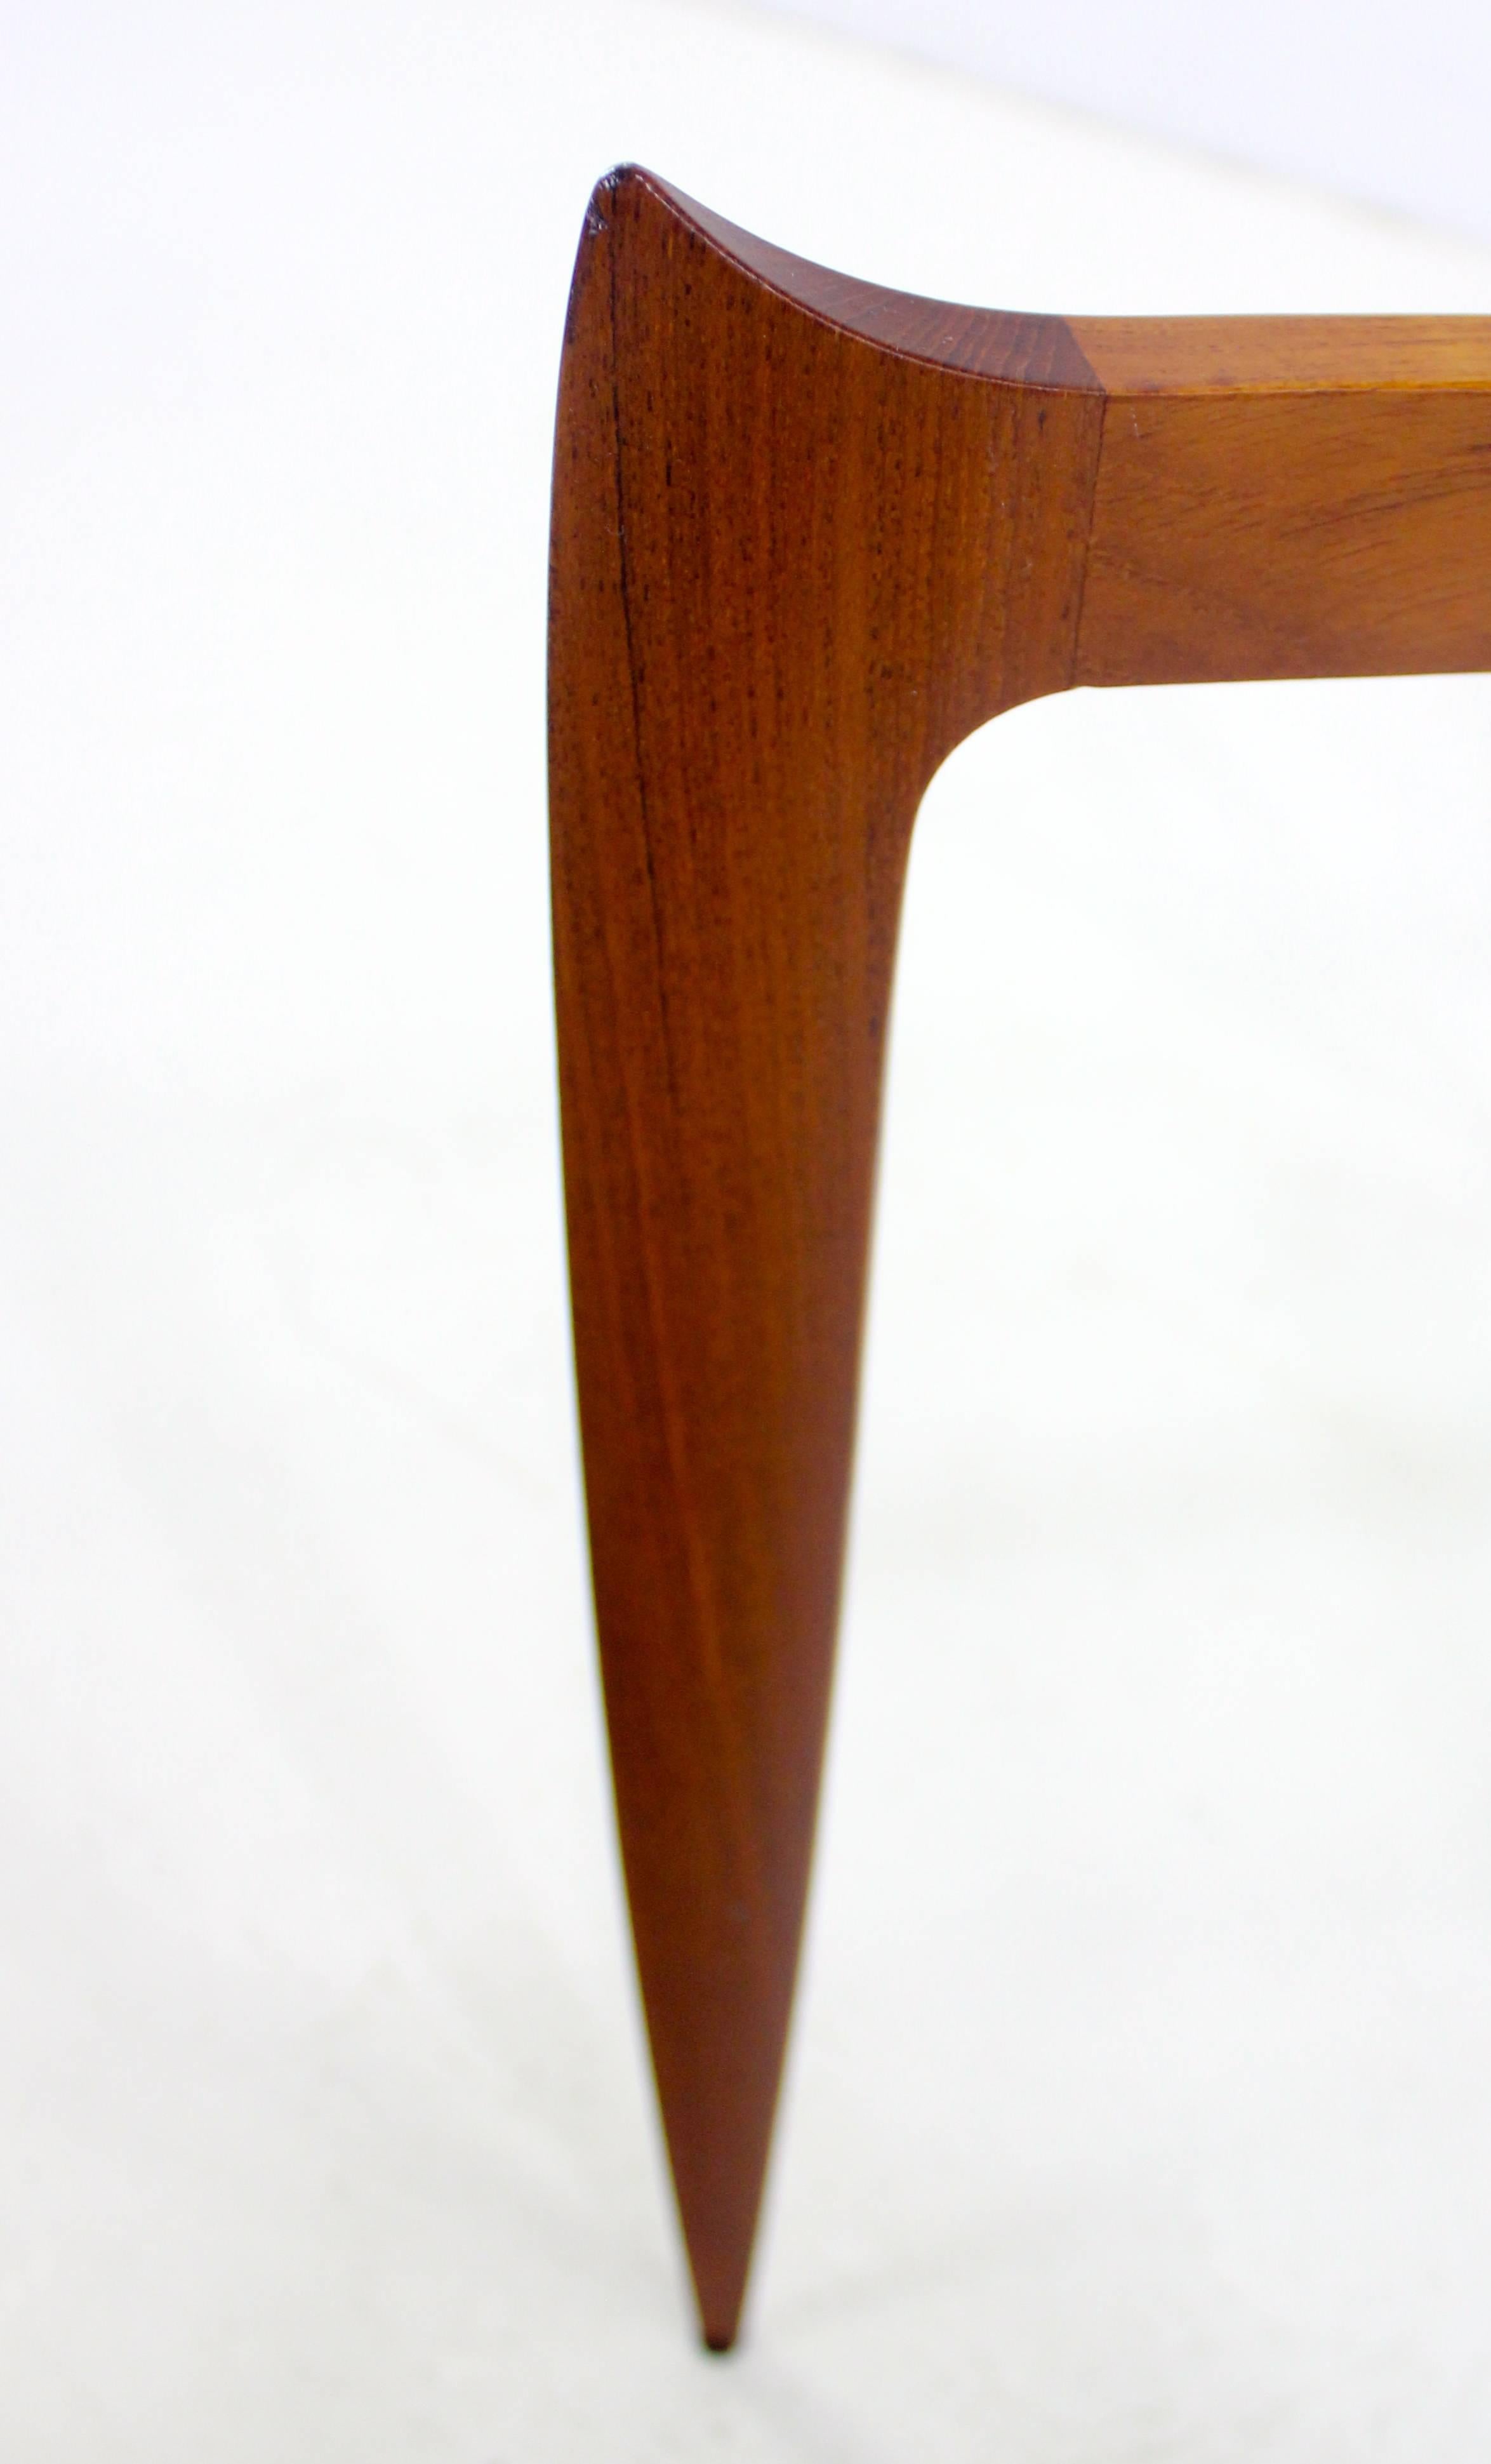 Danish Modern Teak Tray Table Designed by H. Engholm & Svend Aage Willumsen In Excellent Condition For Sale In Portland, OR